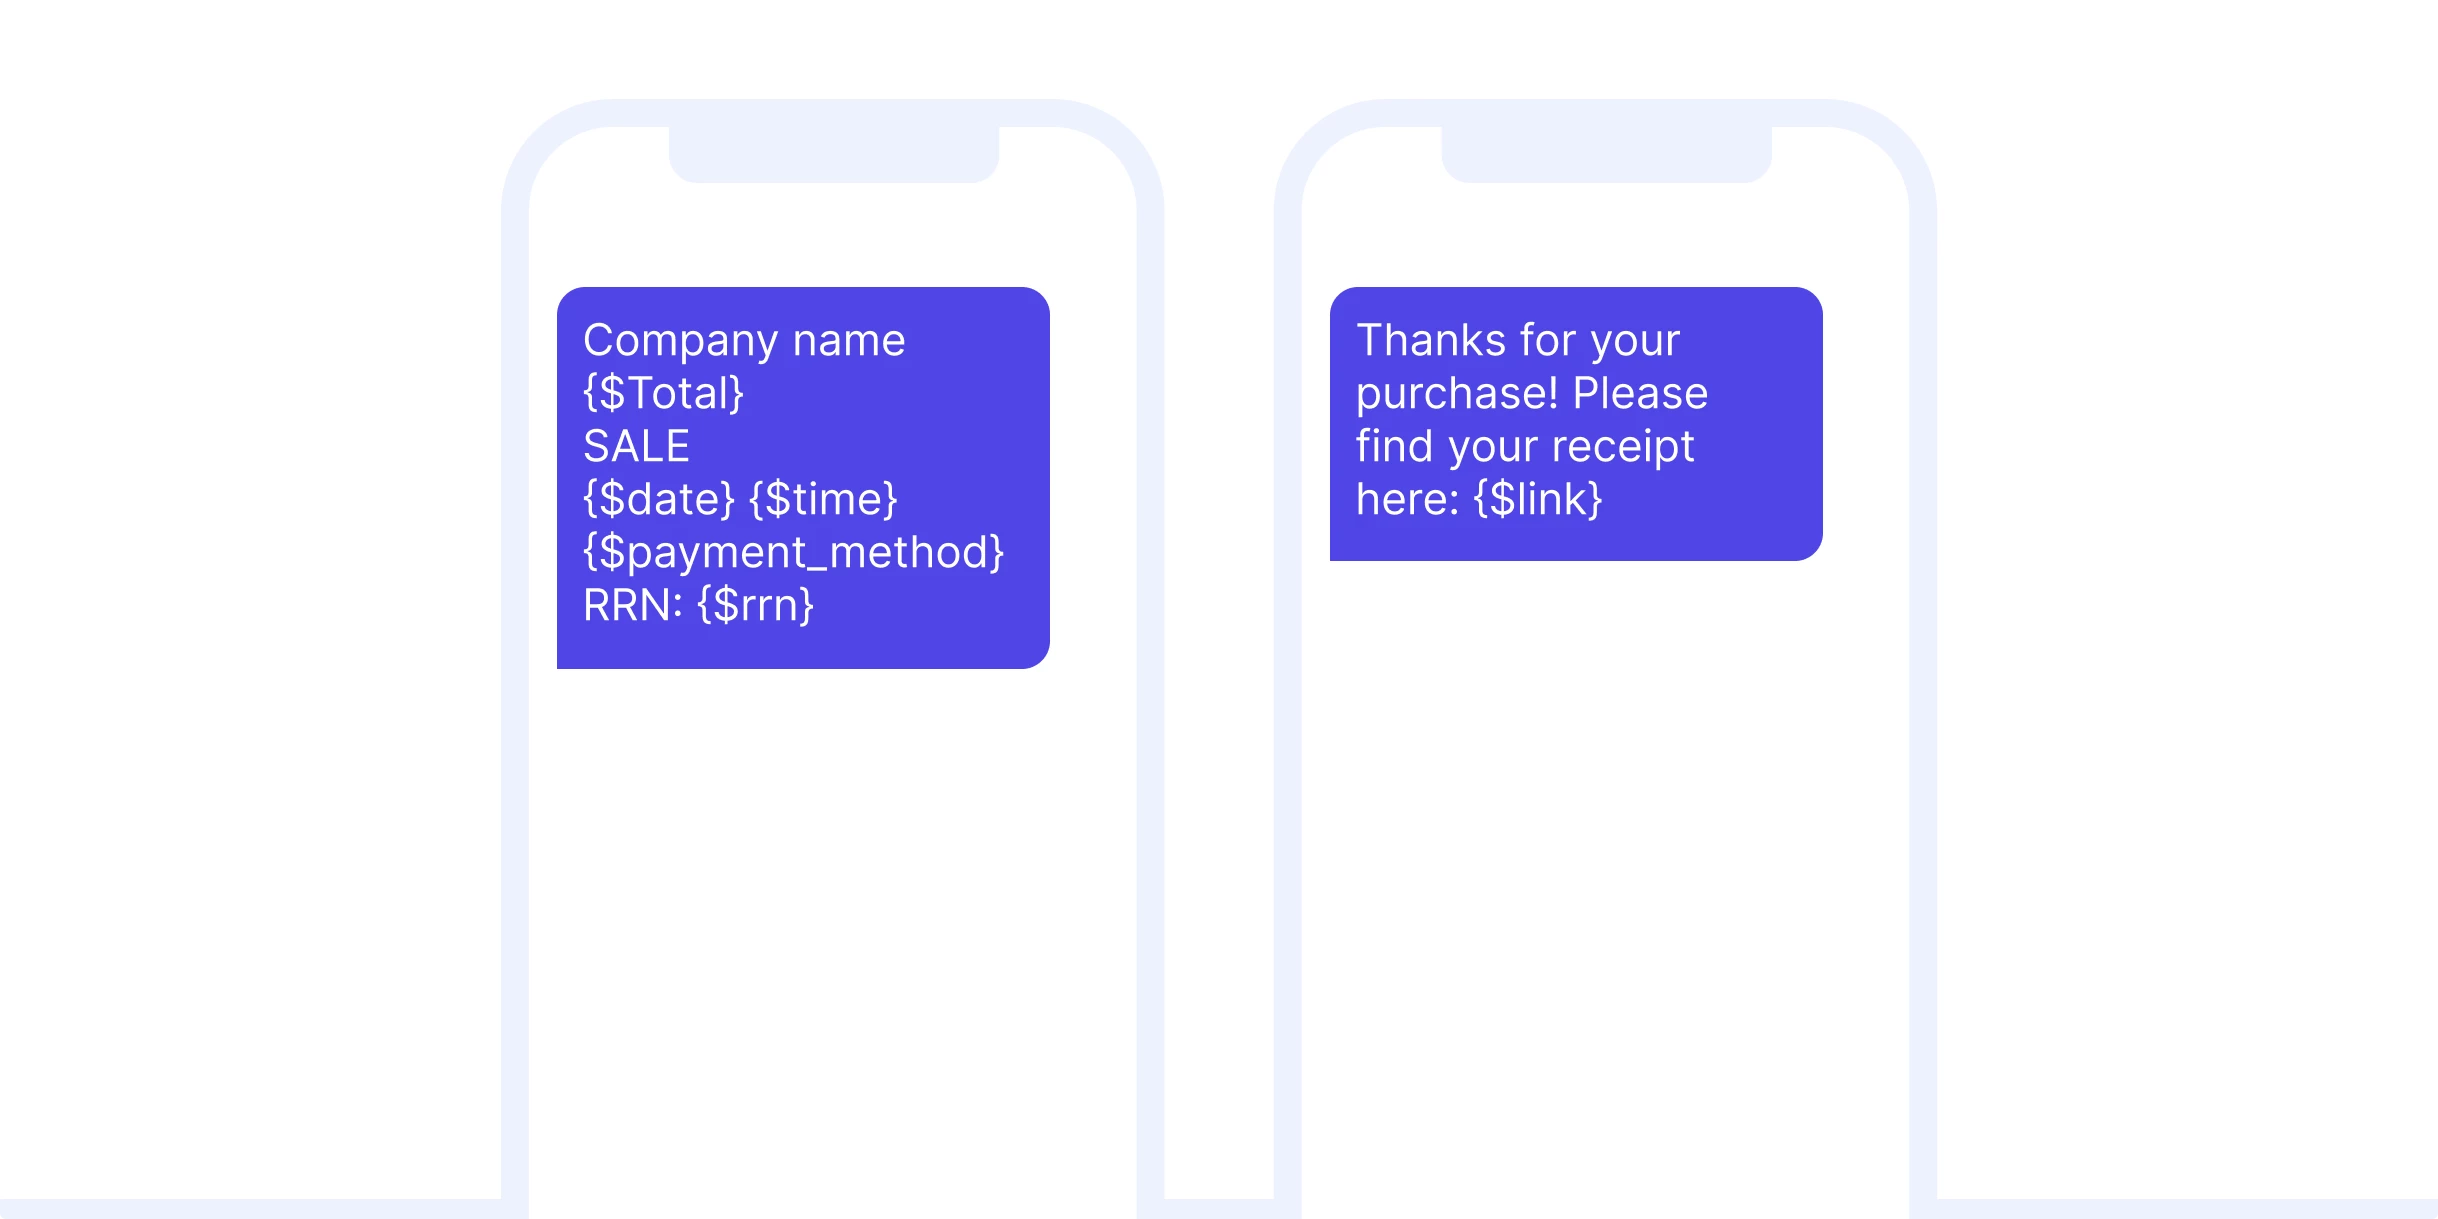 Transactional SMS examples for receipt texts.